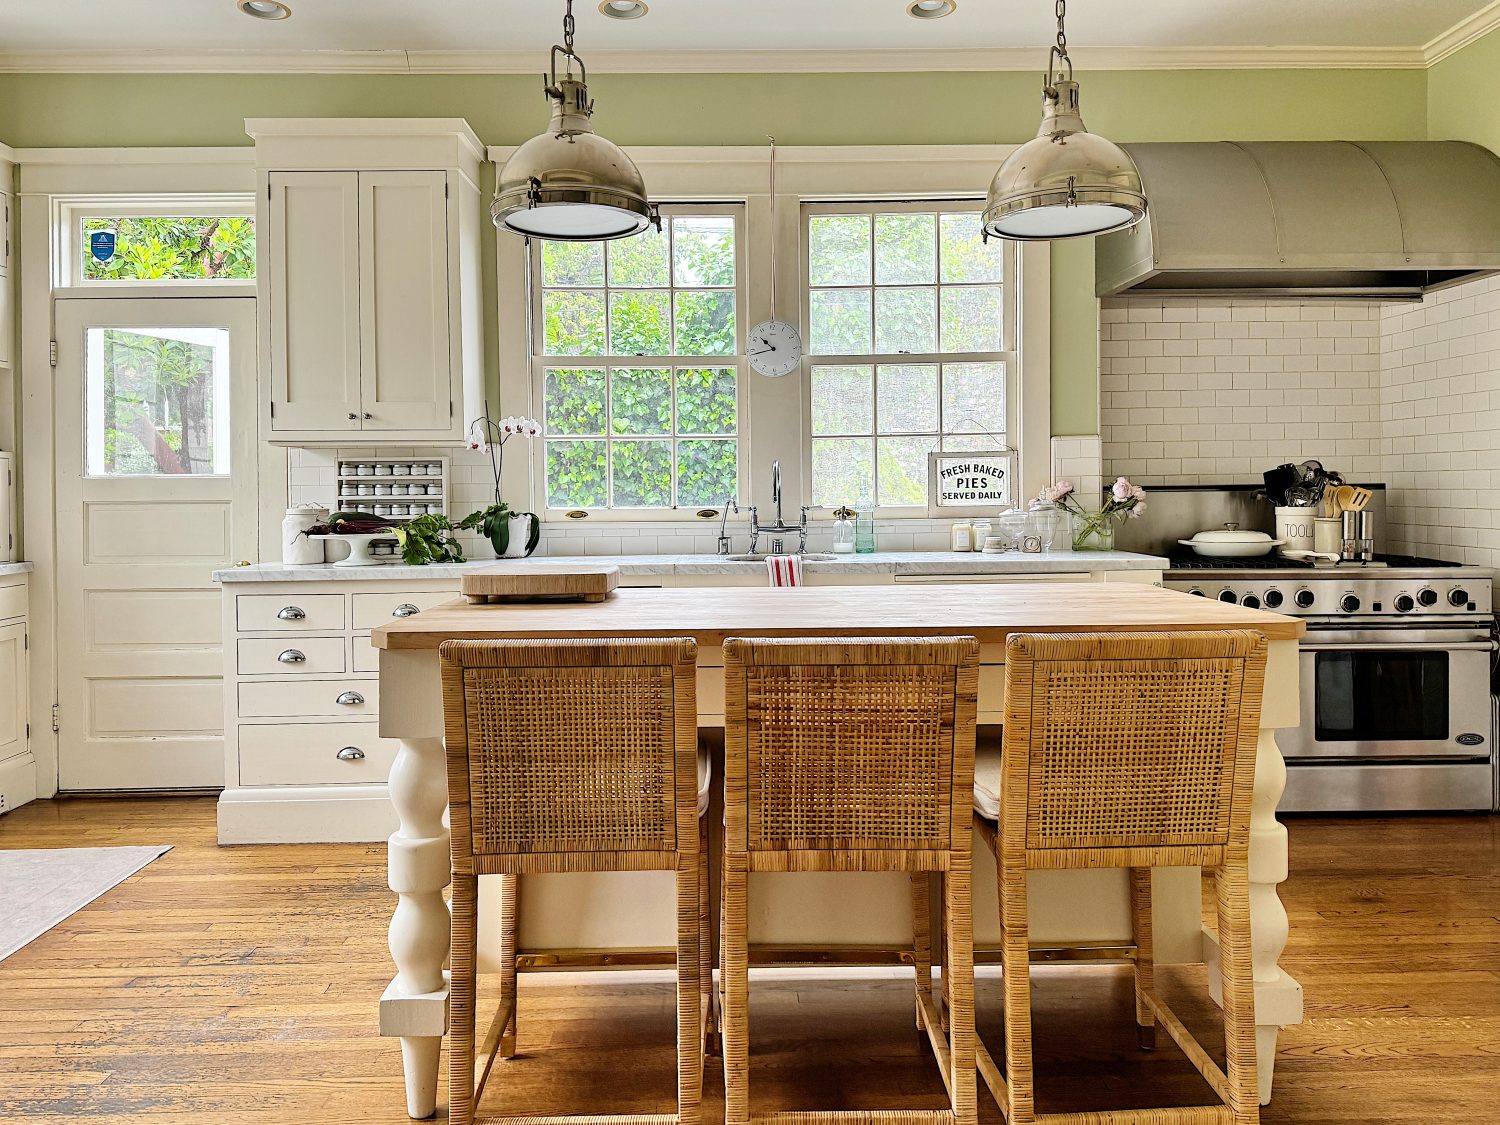 A bright kitchen featuring a large island with woven chairs, a stainless steel stove, two windows, and hanging pendant lights. There are white cabinets and a door to the side.